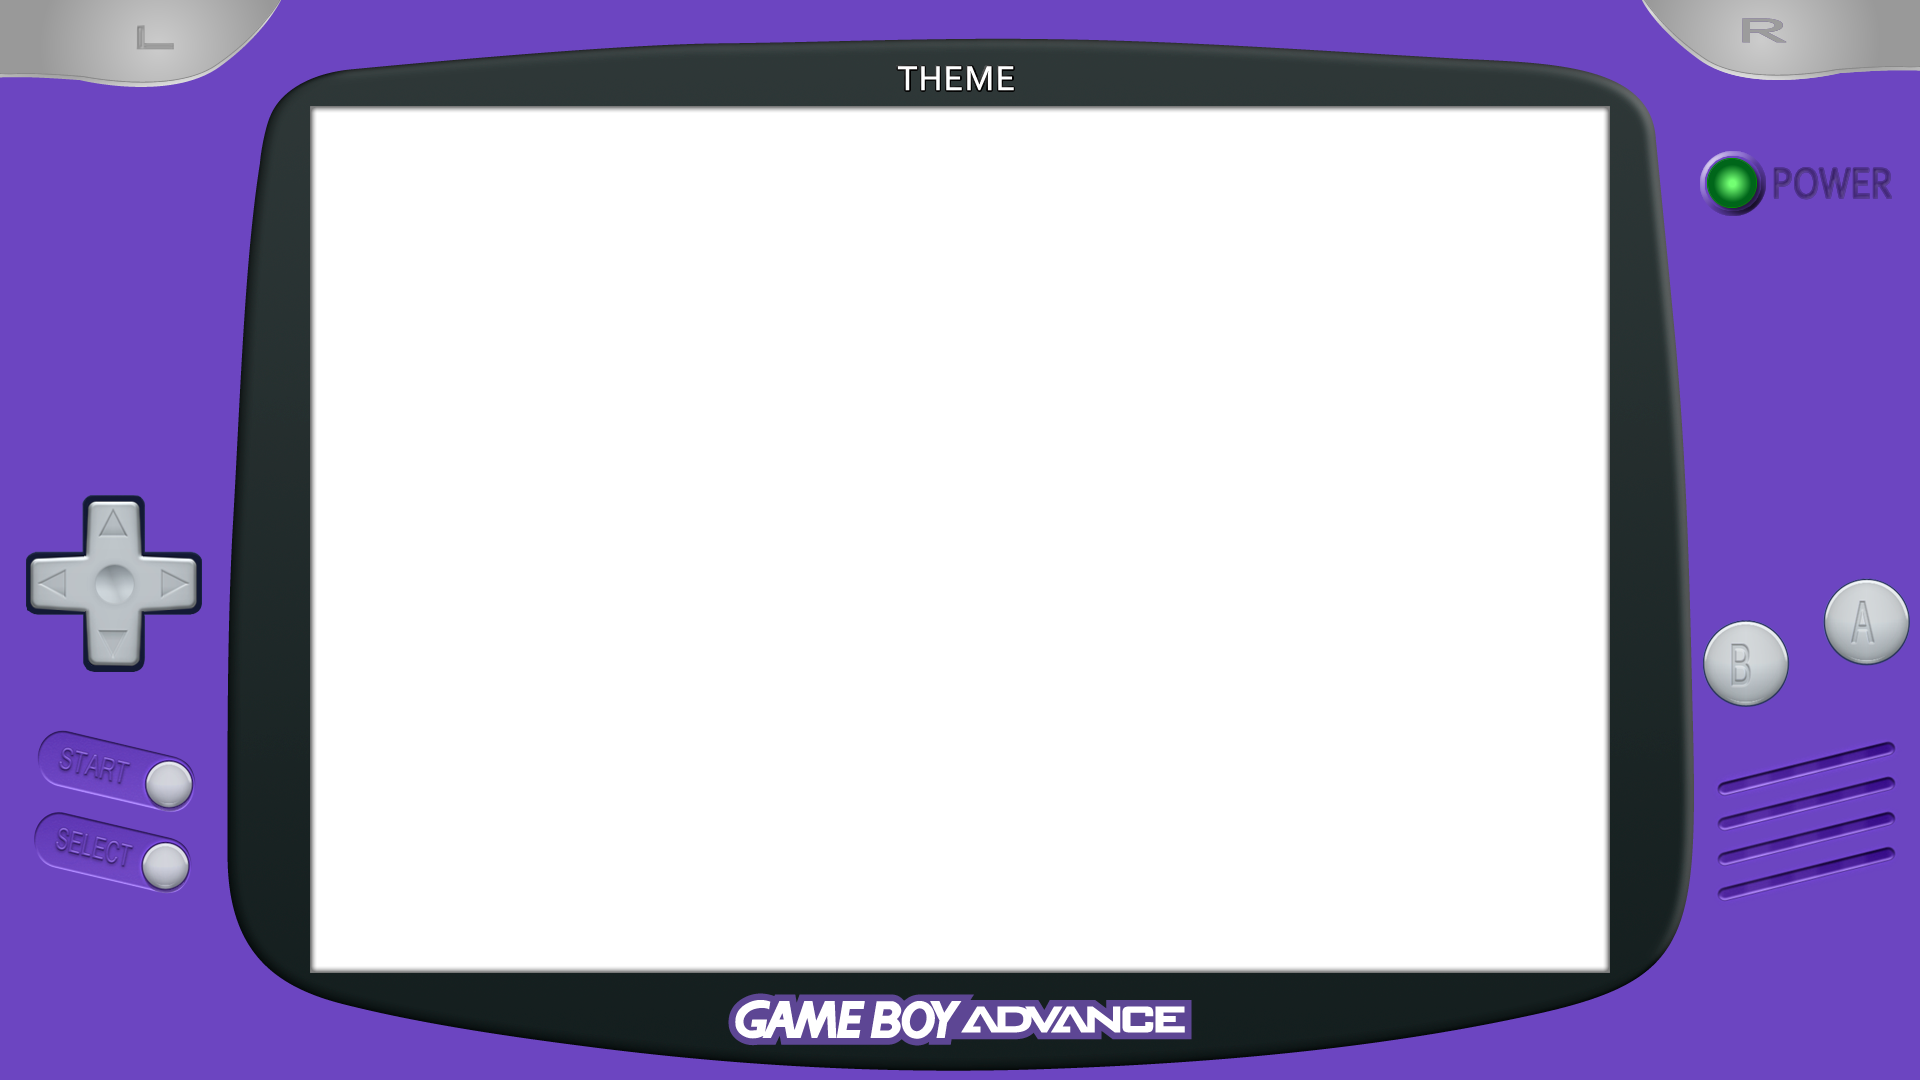 More information about "Nintendo Gameboy Advance Overlay Animated"